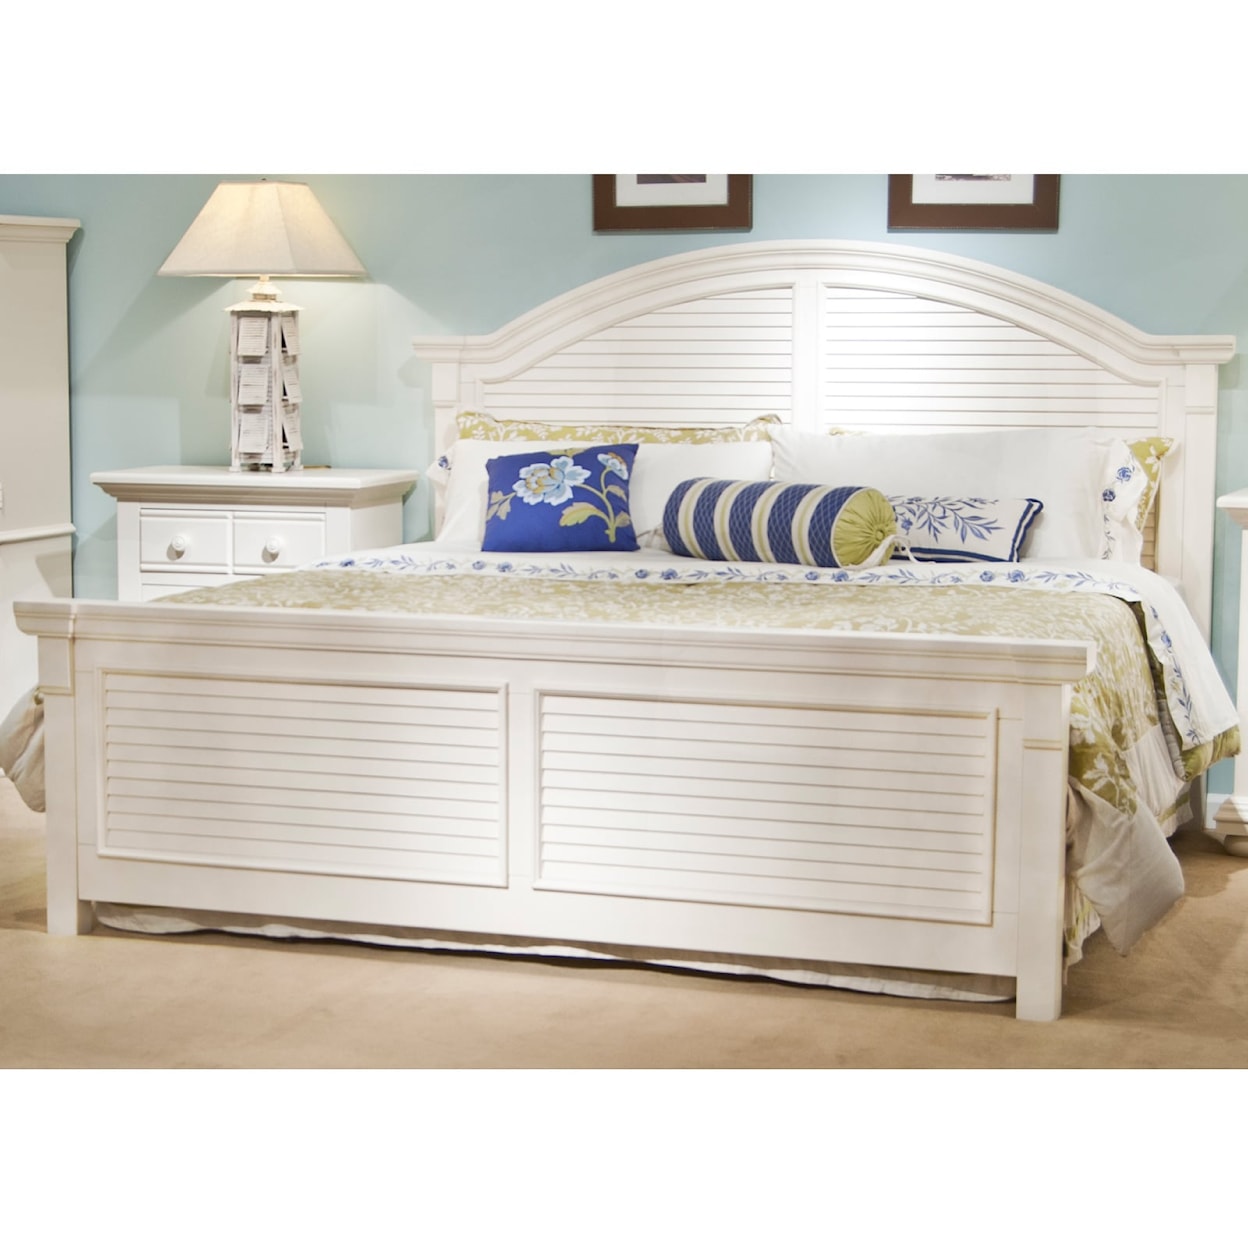 American Woodcrafters Cottage Traditions King Bed